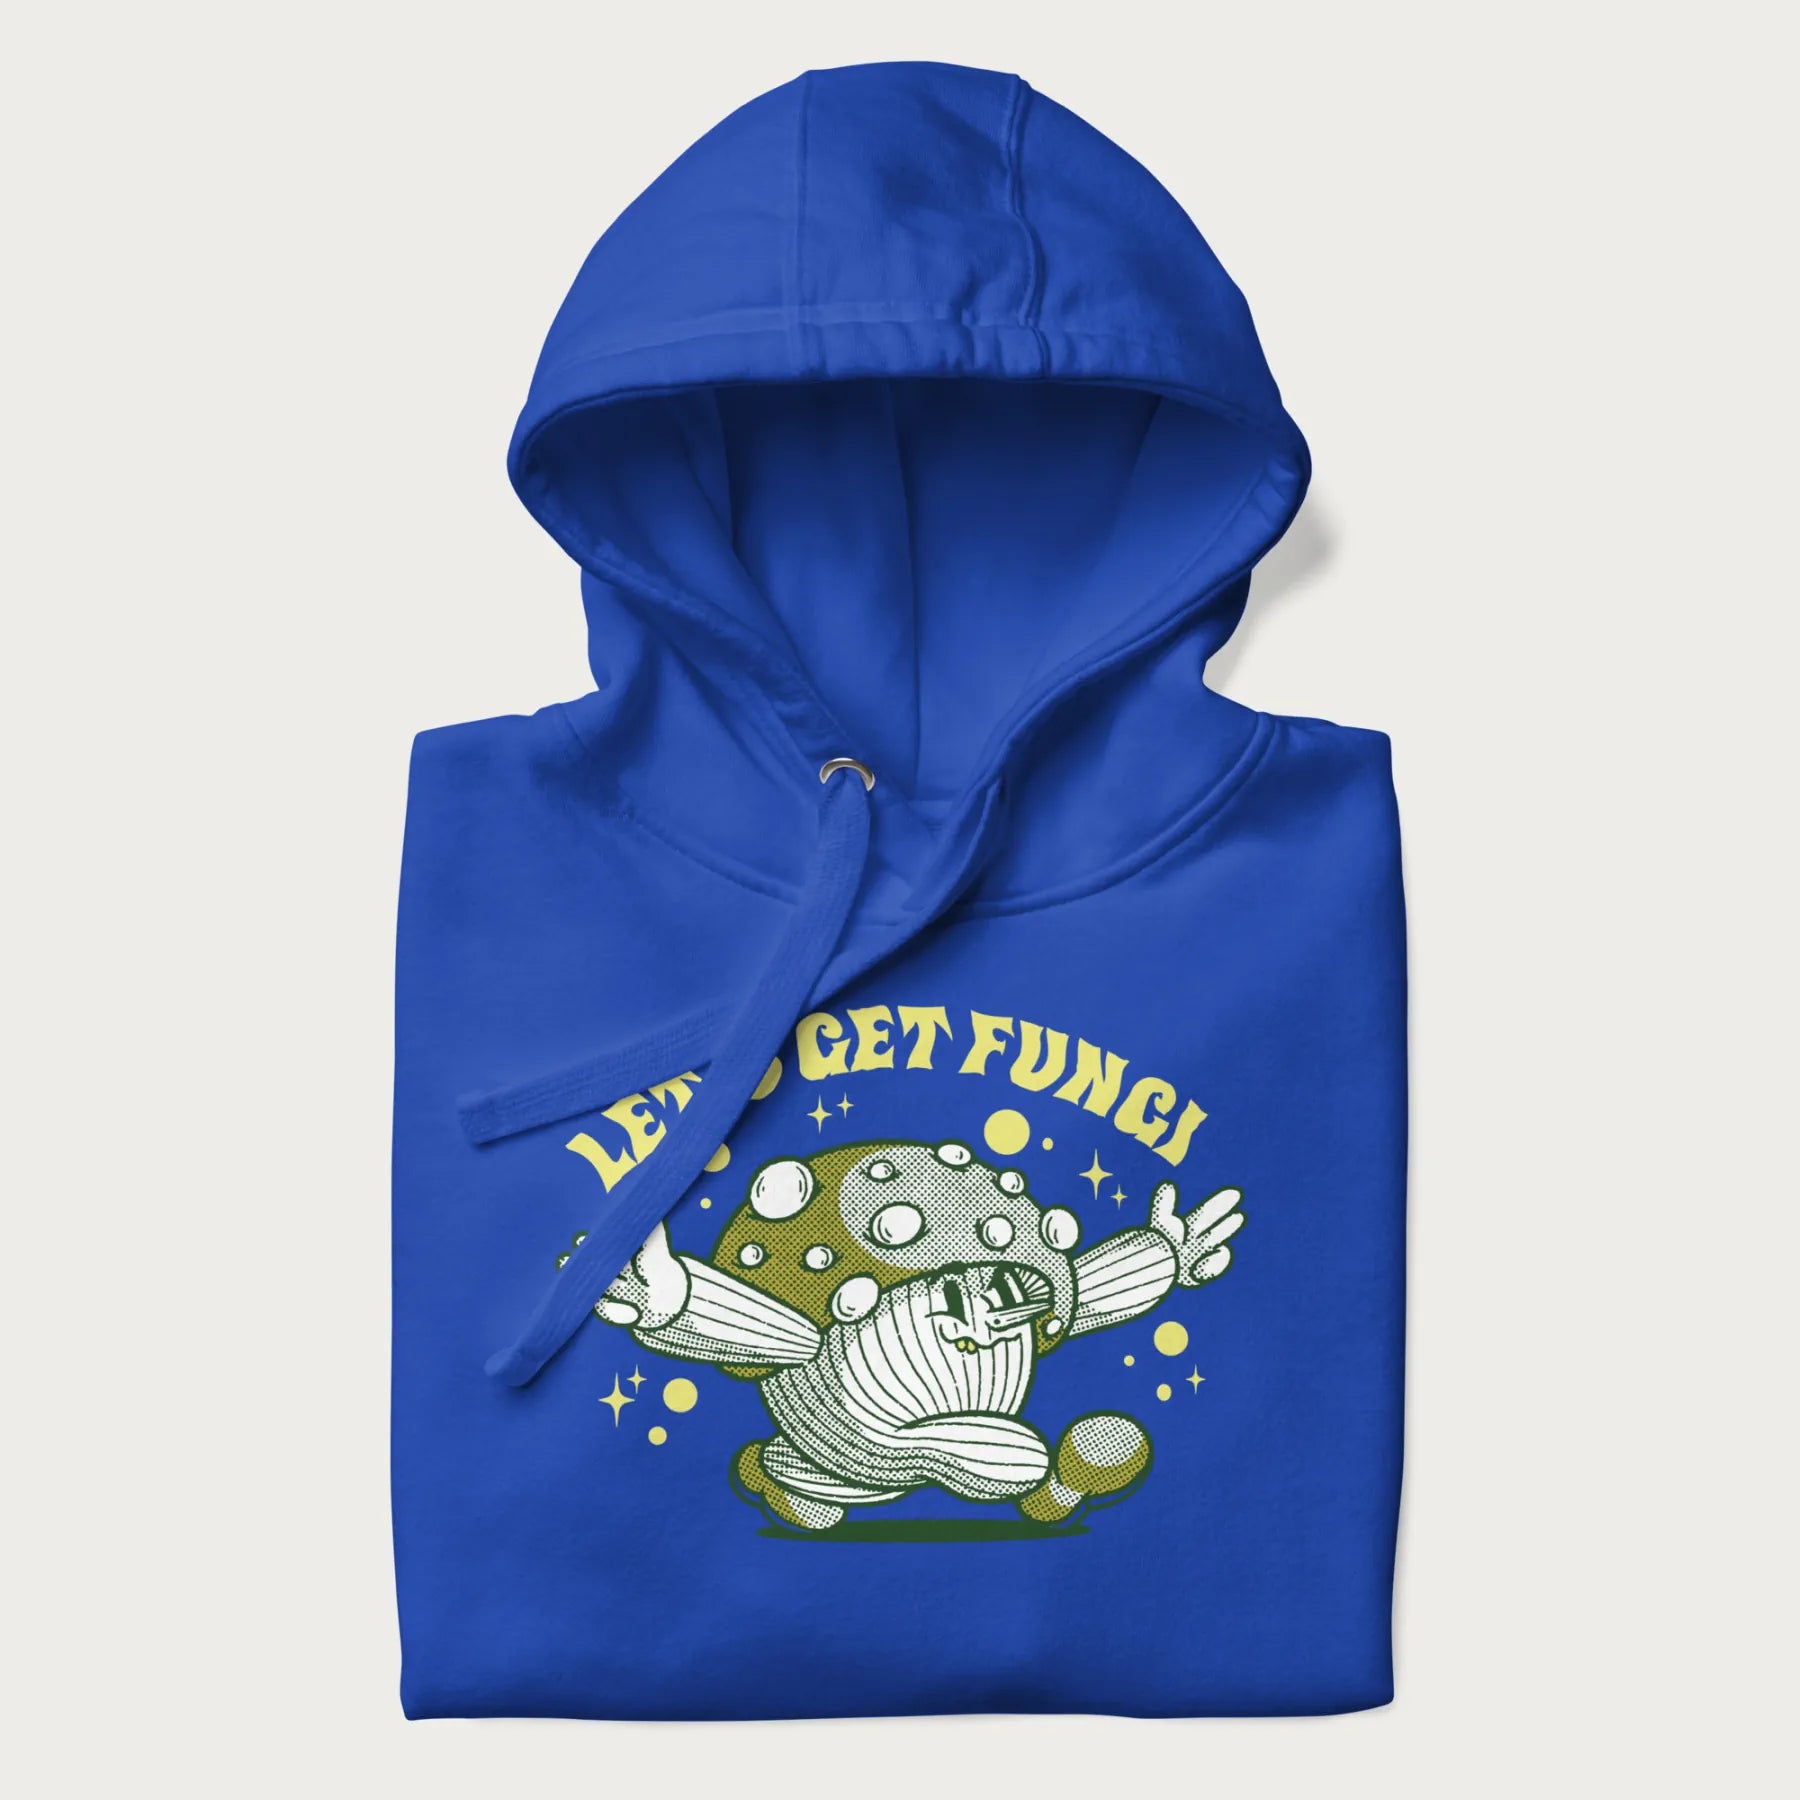 Folded royal blue hoodie with a retro-inspired graphic of a mushroom mascot character and the text 'Let's Get Fungi'.